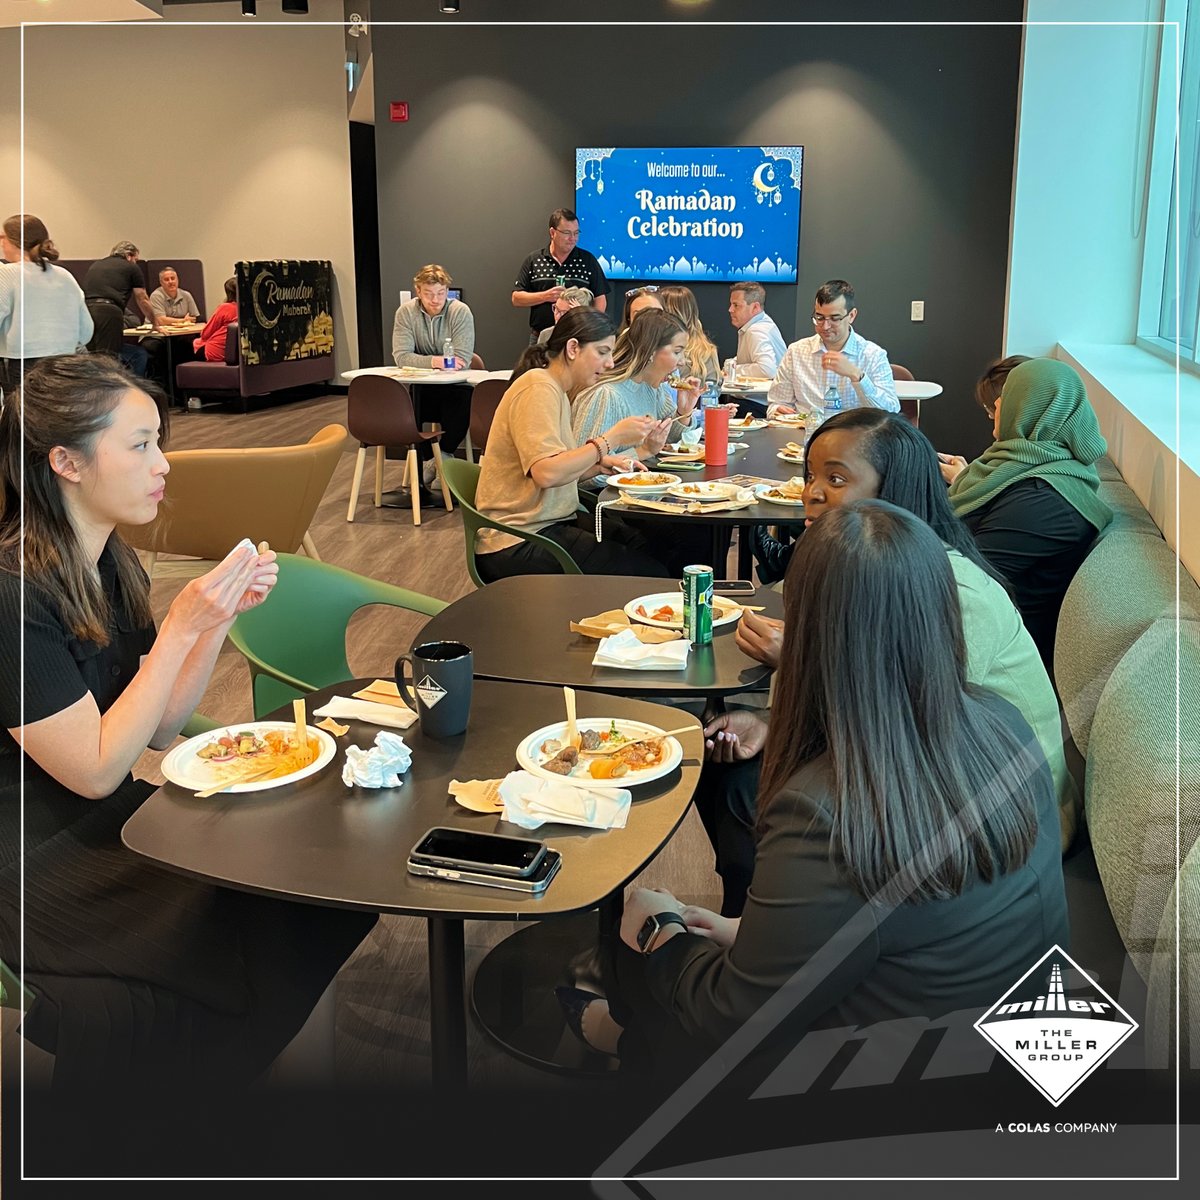 Embracing the spirit of generosity and reflection, we came together to celebrate the end of Ramadan and break the fast by sharing delicious food. With unity and togetherness in mind, we cherish these #MomentsThatMatter with our employees.

#Ramadan #BuildingGreatness